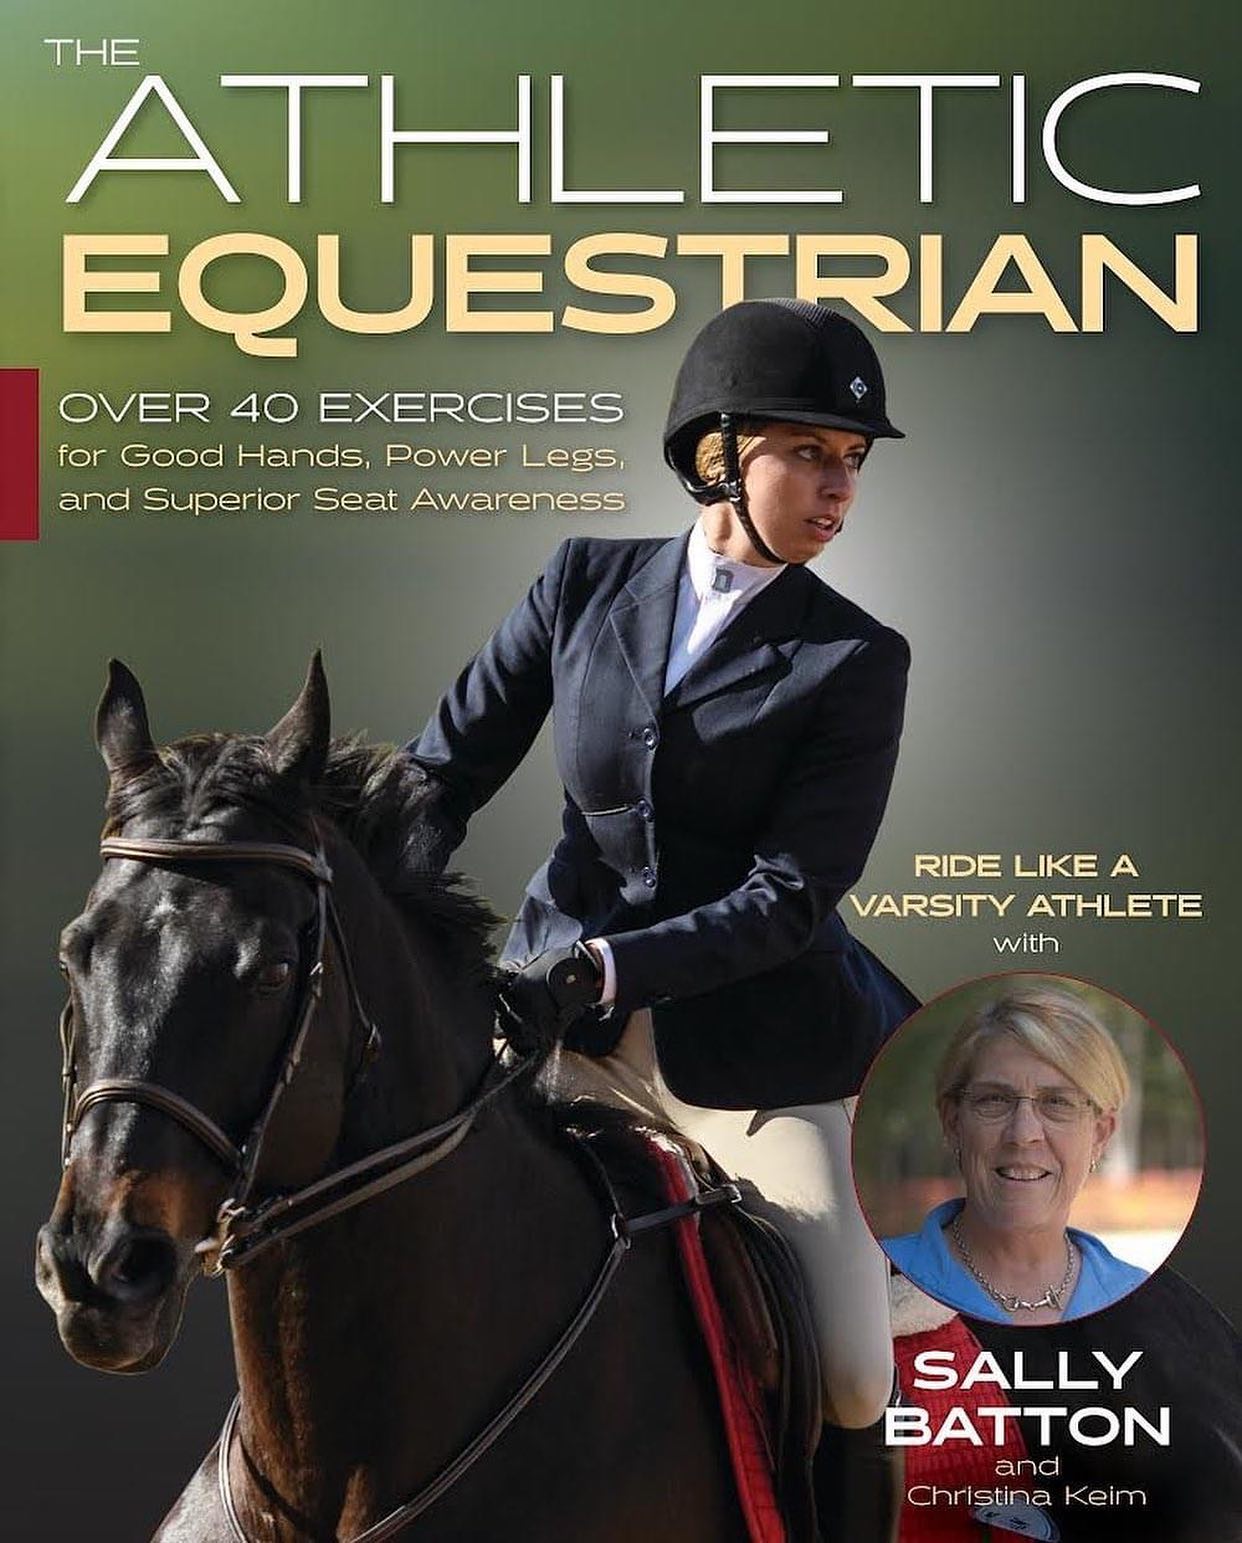 The Athletic Equestrian by Sally Batton and Christina Keim